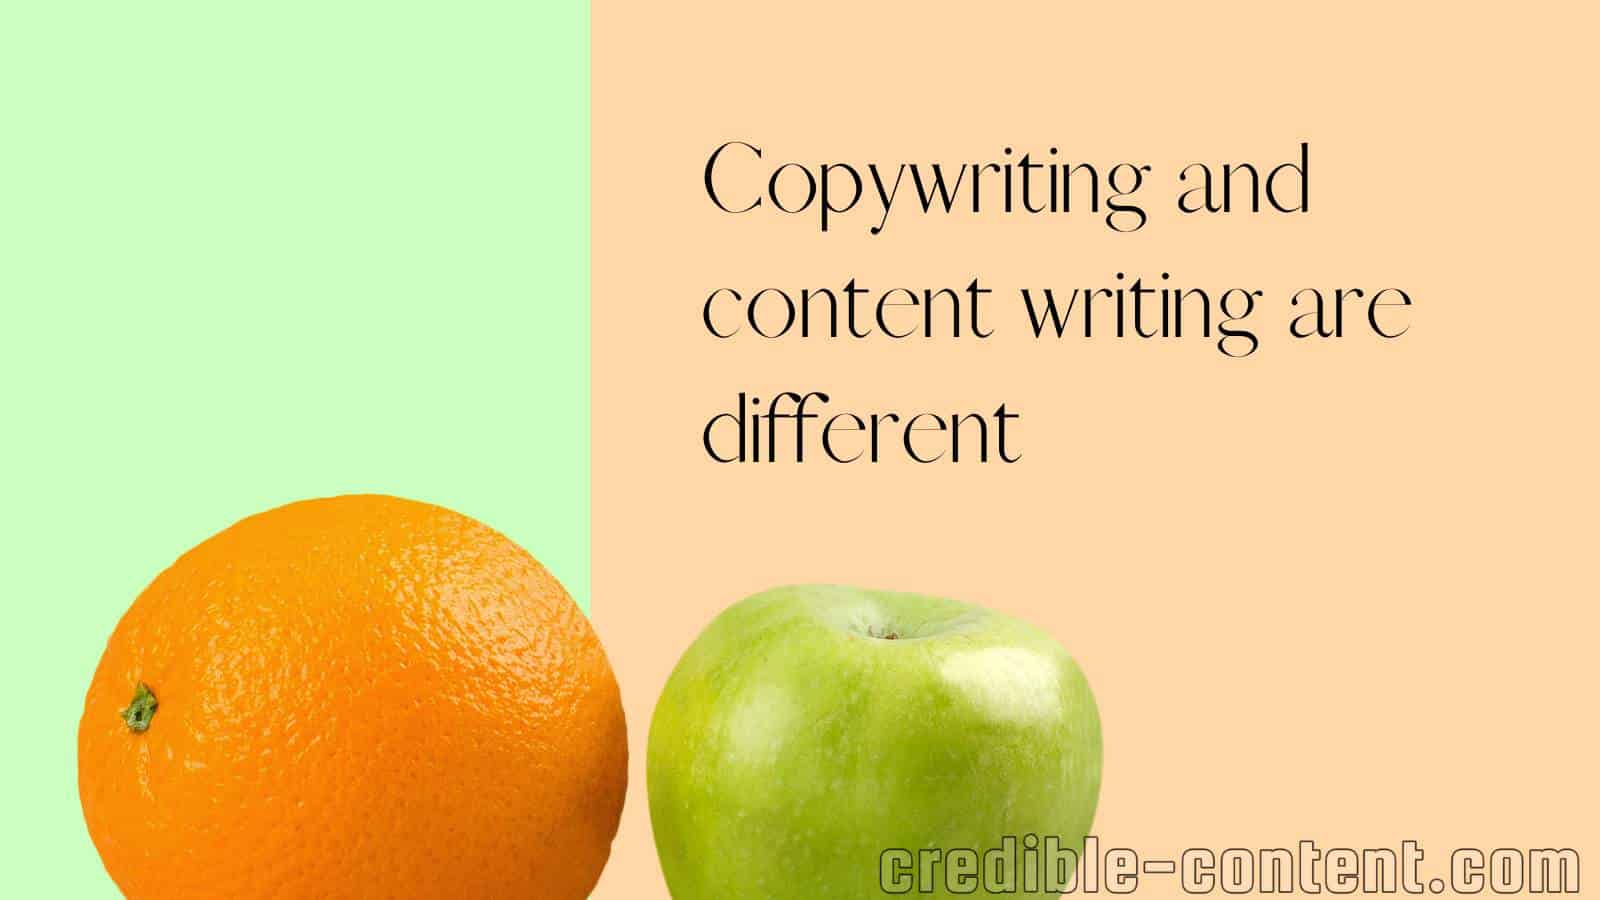 Copywriting and content writing are different